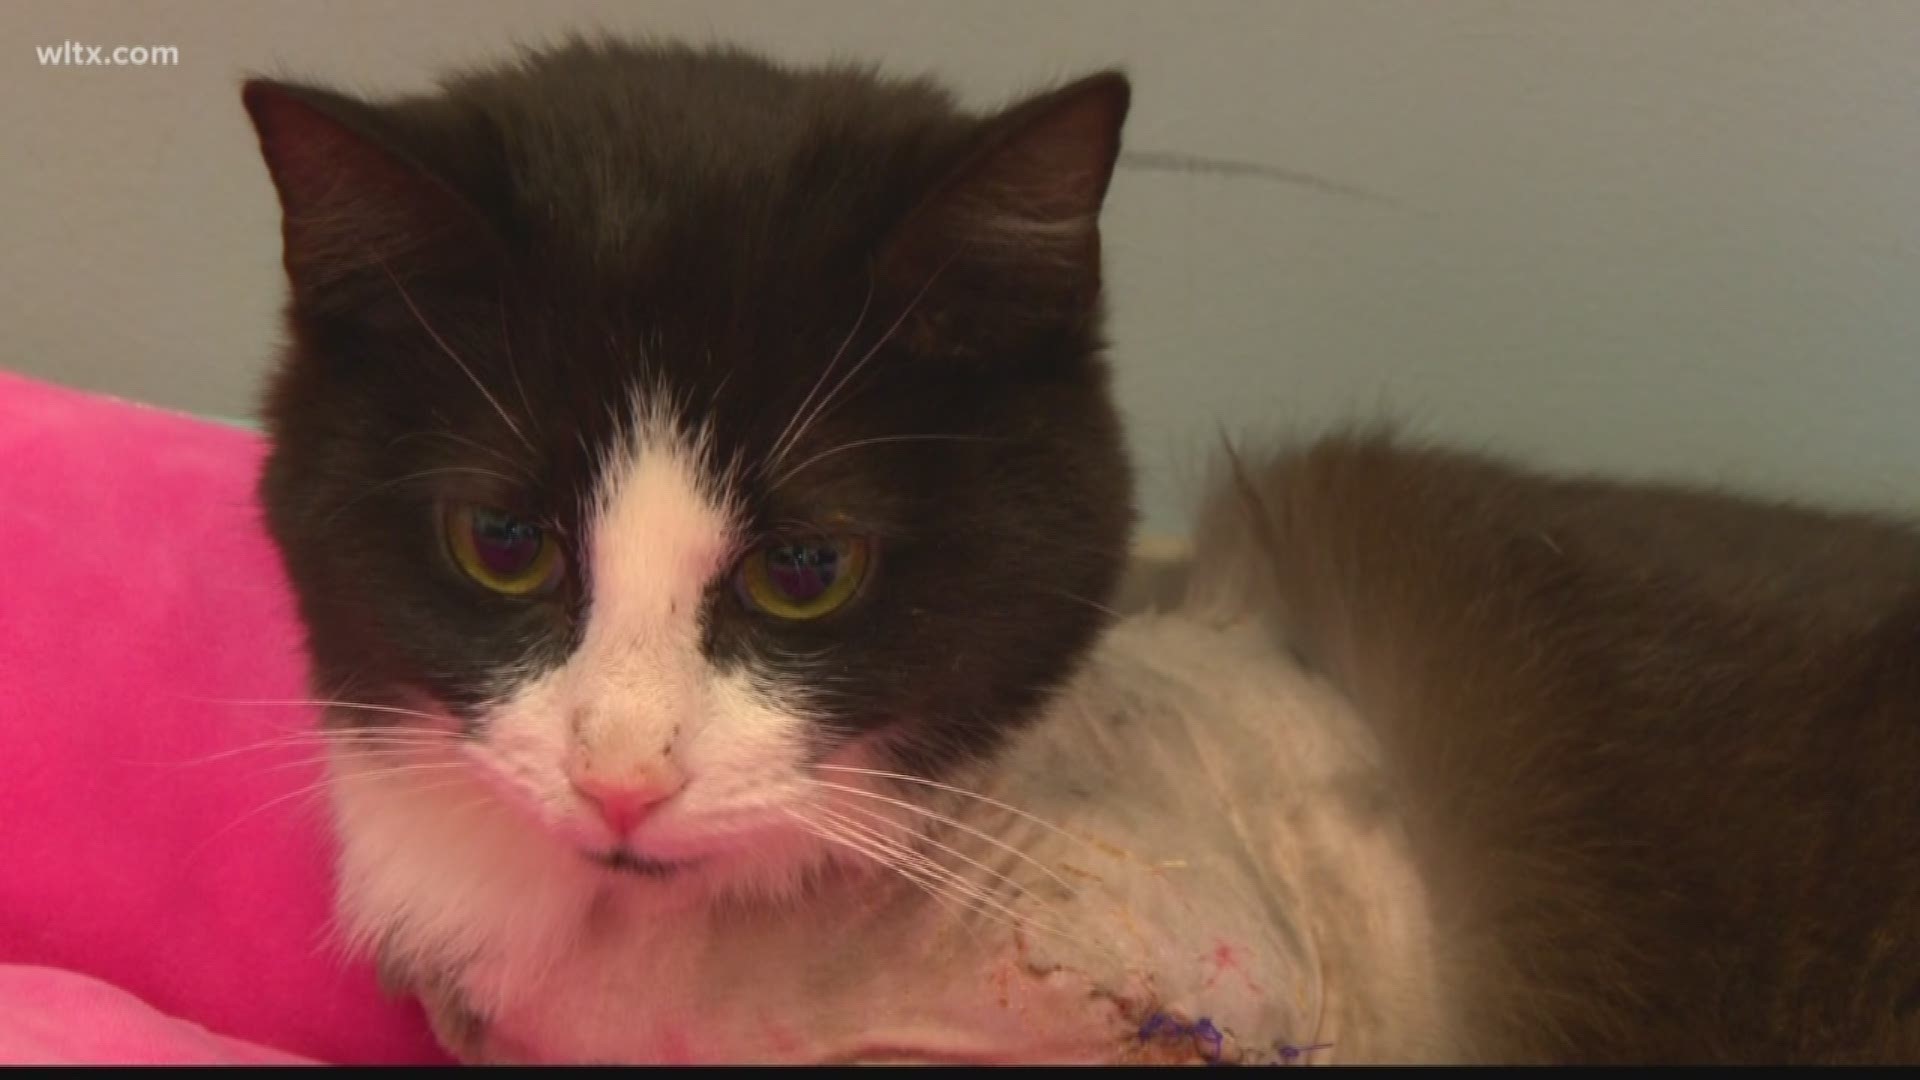 Vets at the Kershaw County Humane Society are taking care of a cat they say was shot multiple times in the legs.